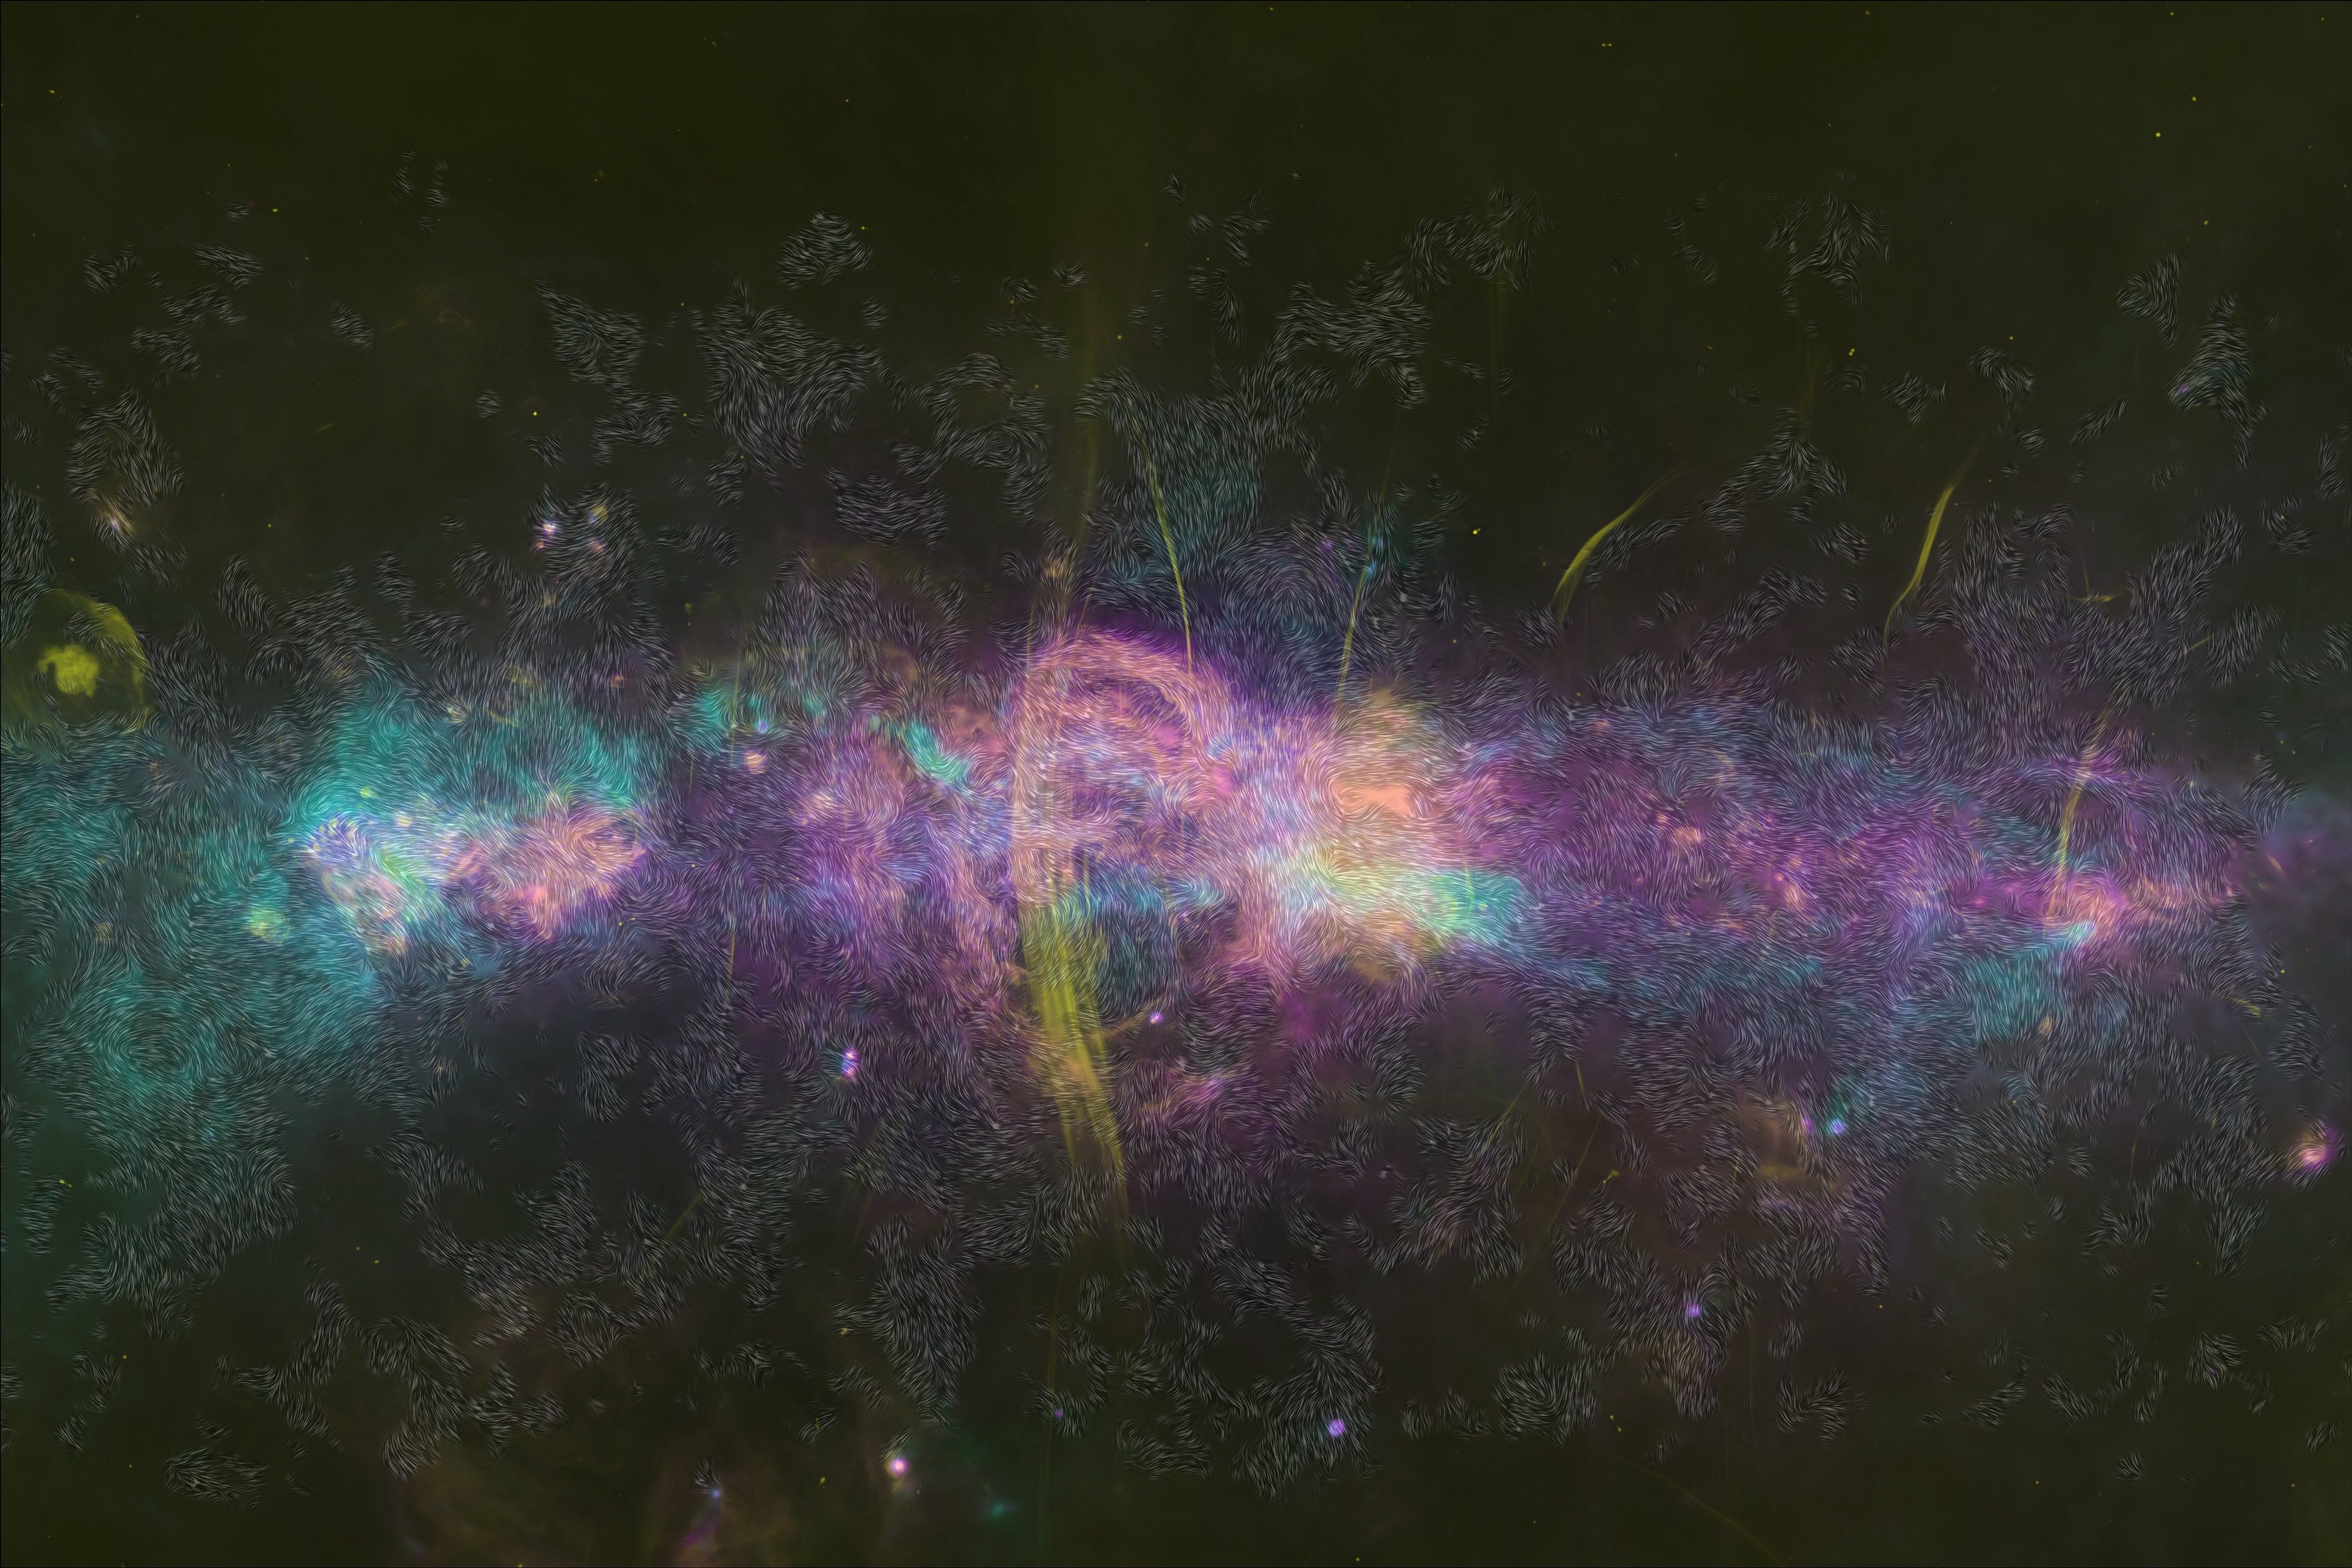 A composite image of the milky way galaxy showing colorful interstellar dust and gas with star fields.